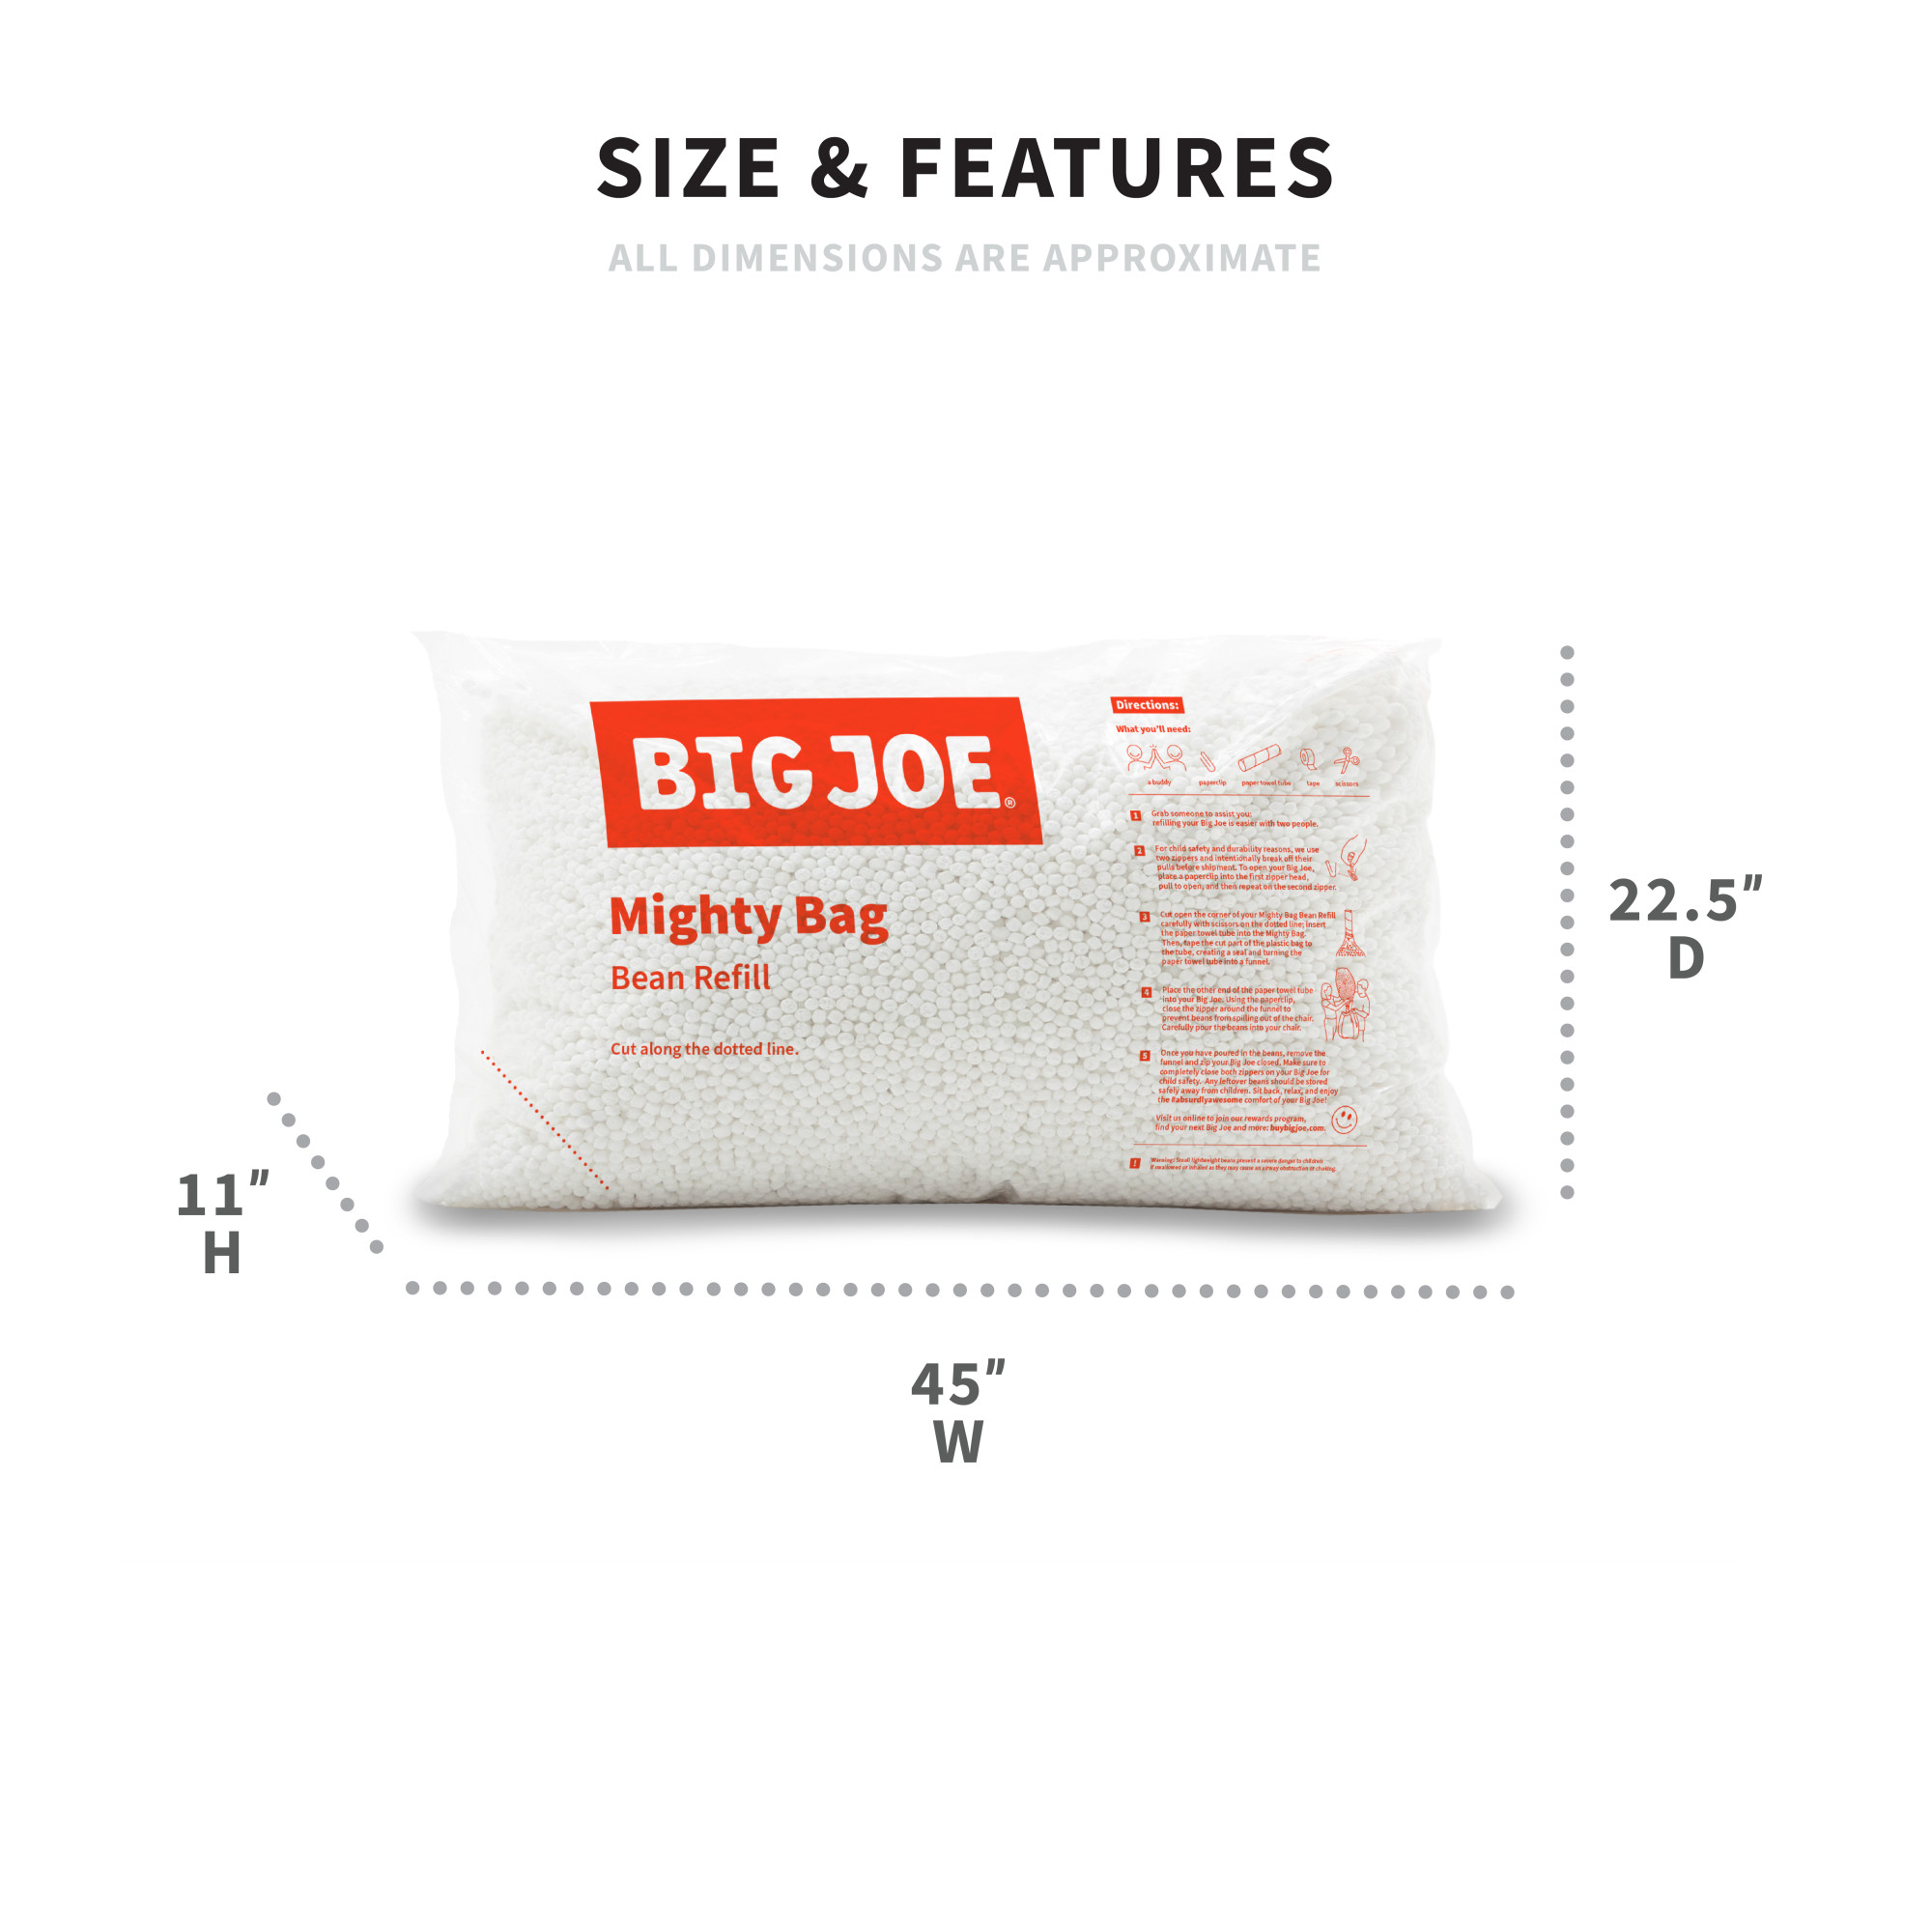 Big Joe Bean Refill Polystyrene Beans for Bean Bags or Crafts, 100 Liters - image 3 of 5